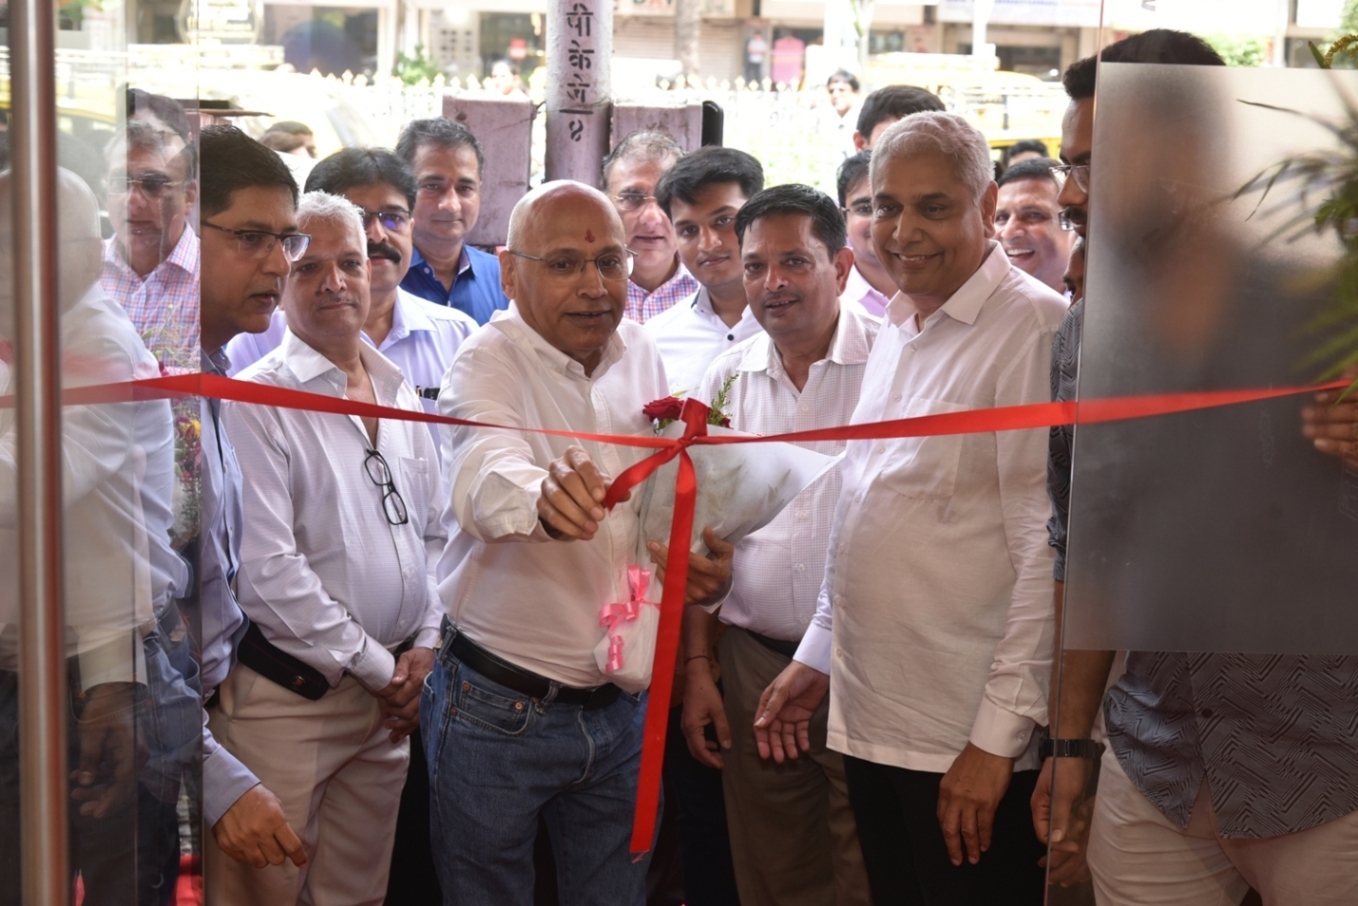 Mr. Inder T. Jaisinghani (CMD, Polycab India Ltd.) inaugurates their first-ever Polycab Experience Centre in the country at the iconic Lohar Chawl market in Mumbai.- Photo By Sachin Murdeshwar GPN